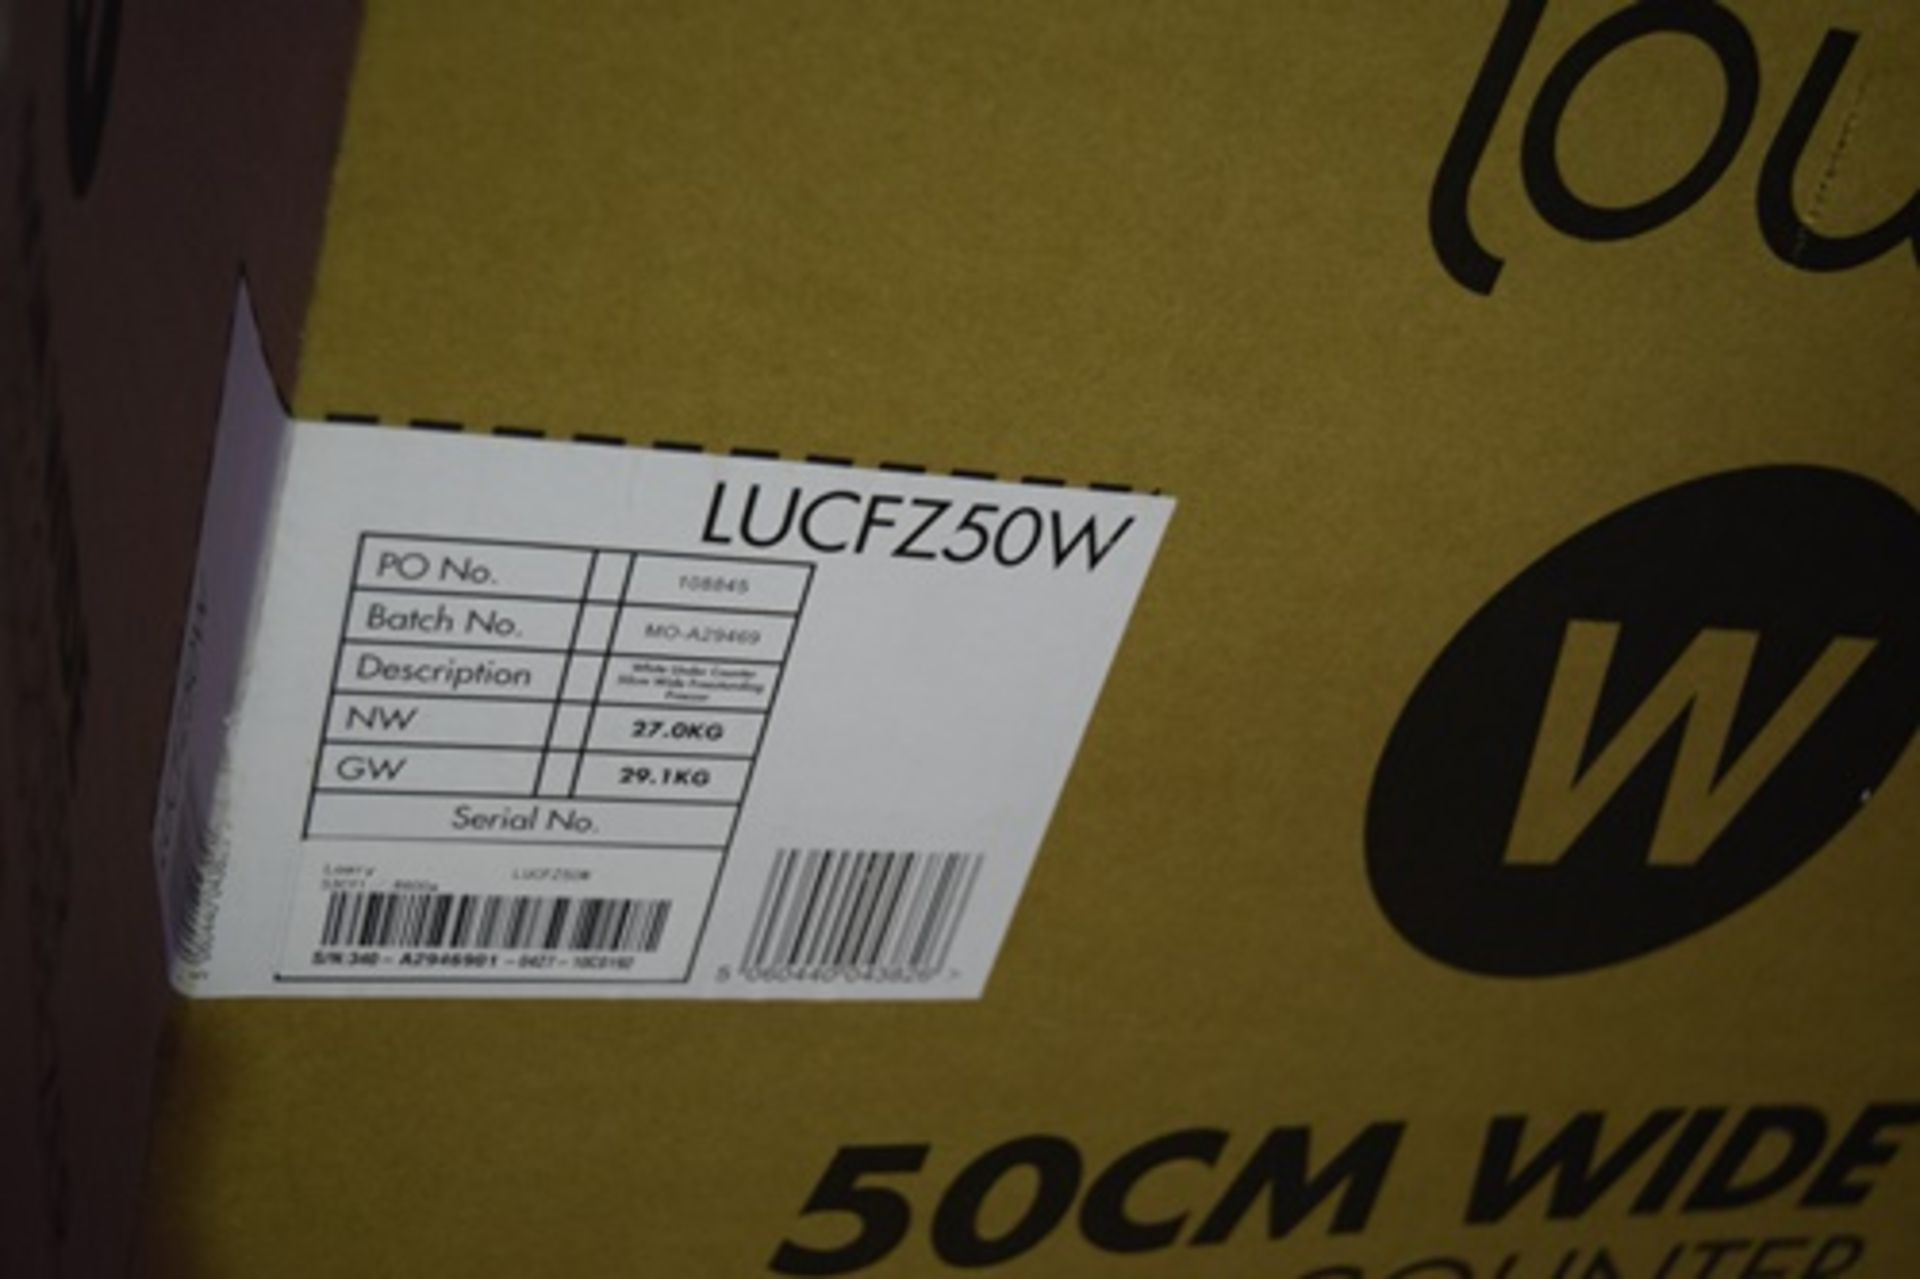 A Lowry 50cm wide under counter freezer, model LUCFZ50W - Sealed new in box (ES9) - Image 3 of 3